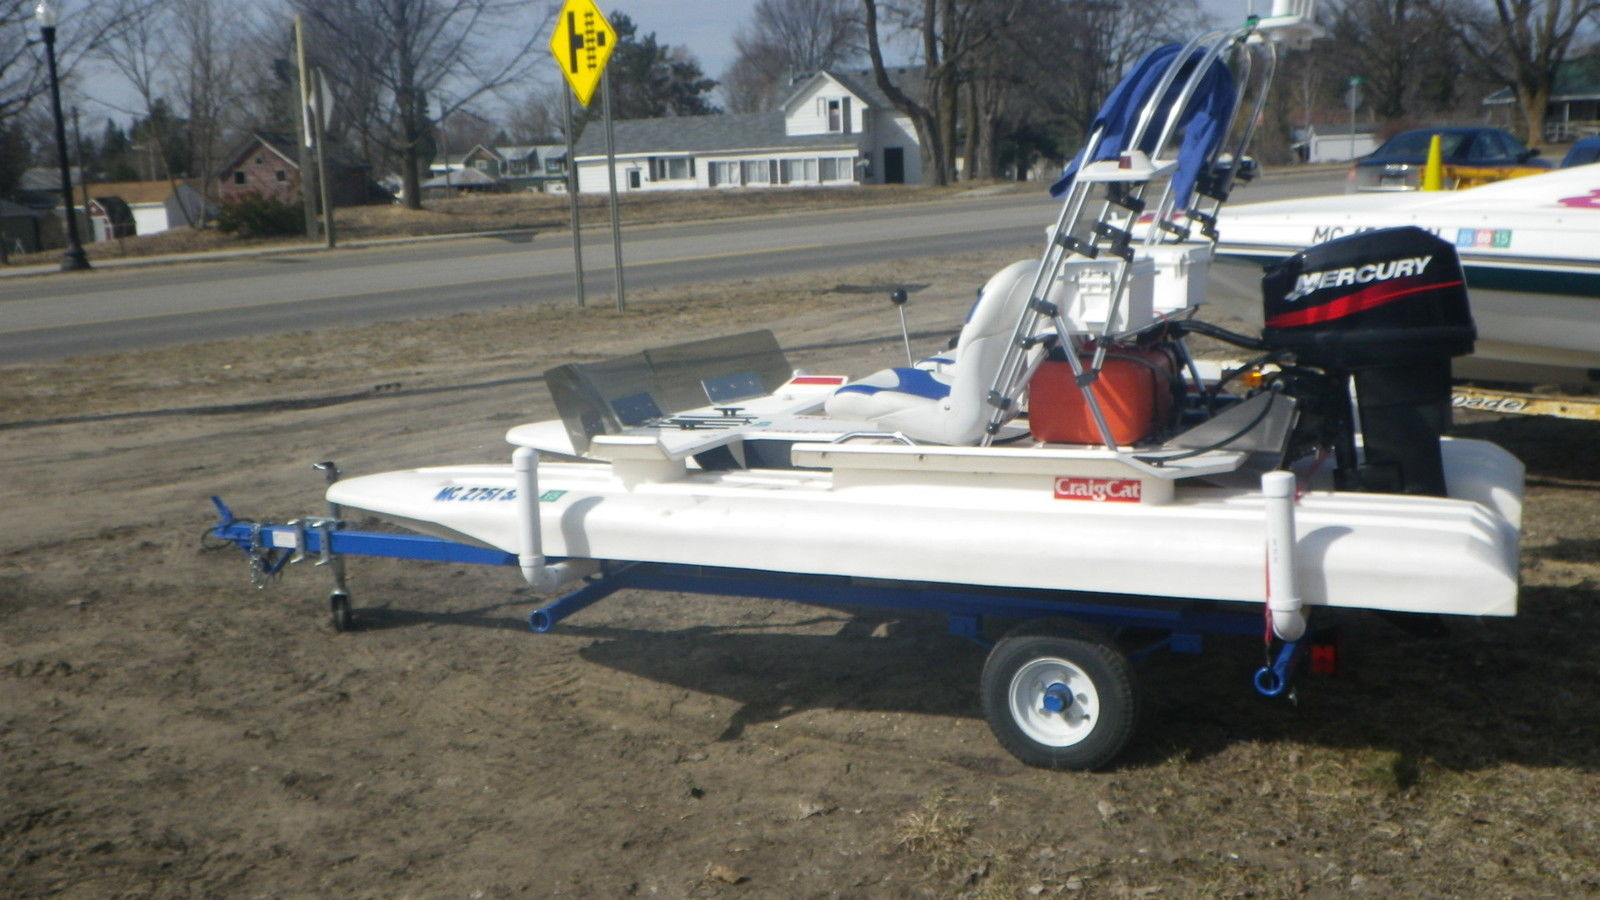 CRAIGCAT CATAMARN 2005 for sale for 7,500